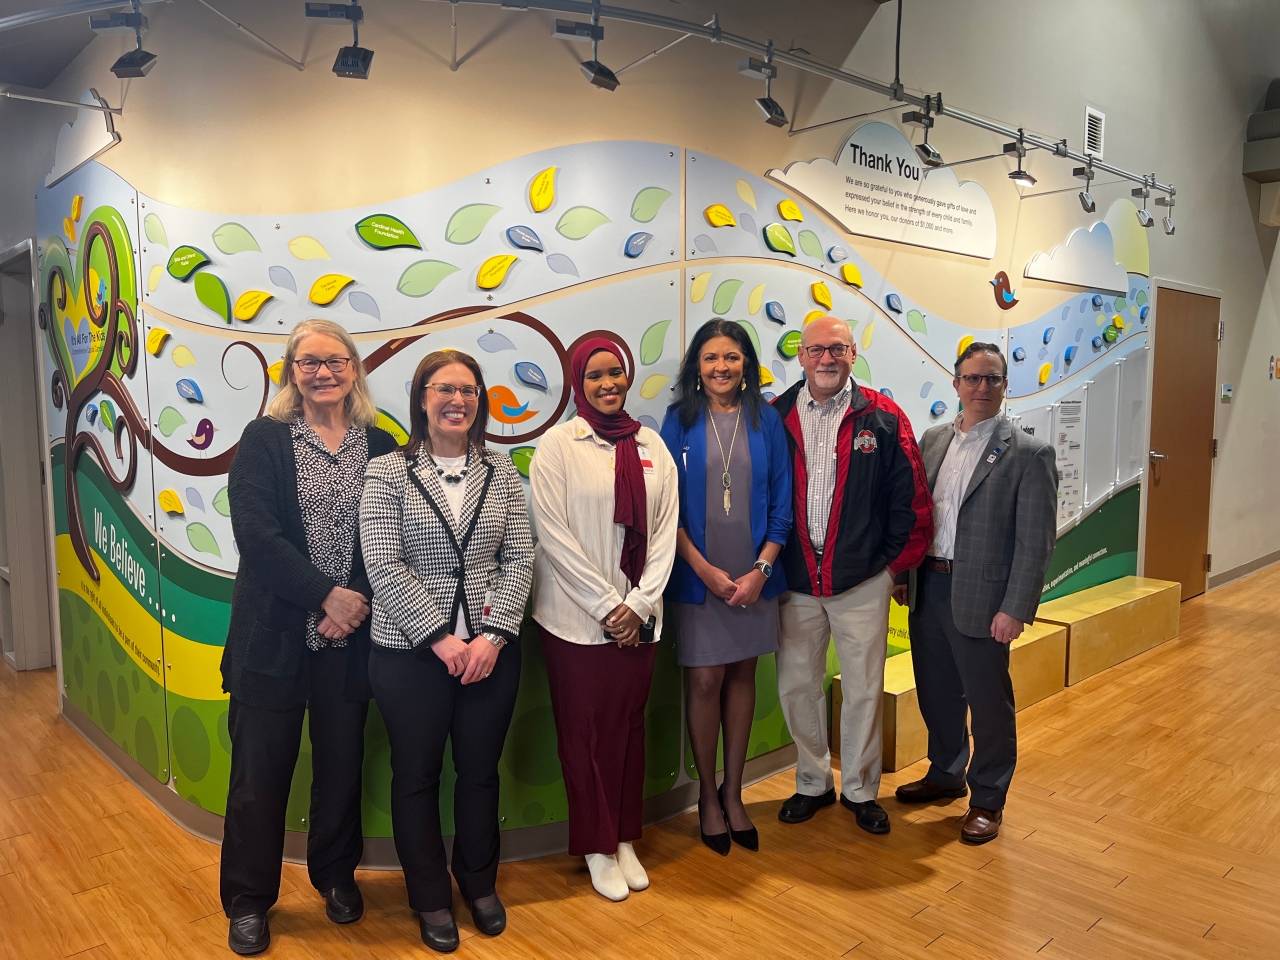 Rep. Somani joined fellow democratic colleagues on a visit to The Childhood League Center, which provides crucial developmental services to area preschool children and their families.